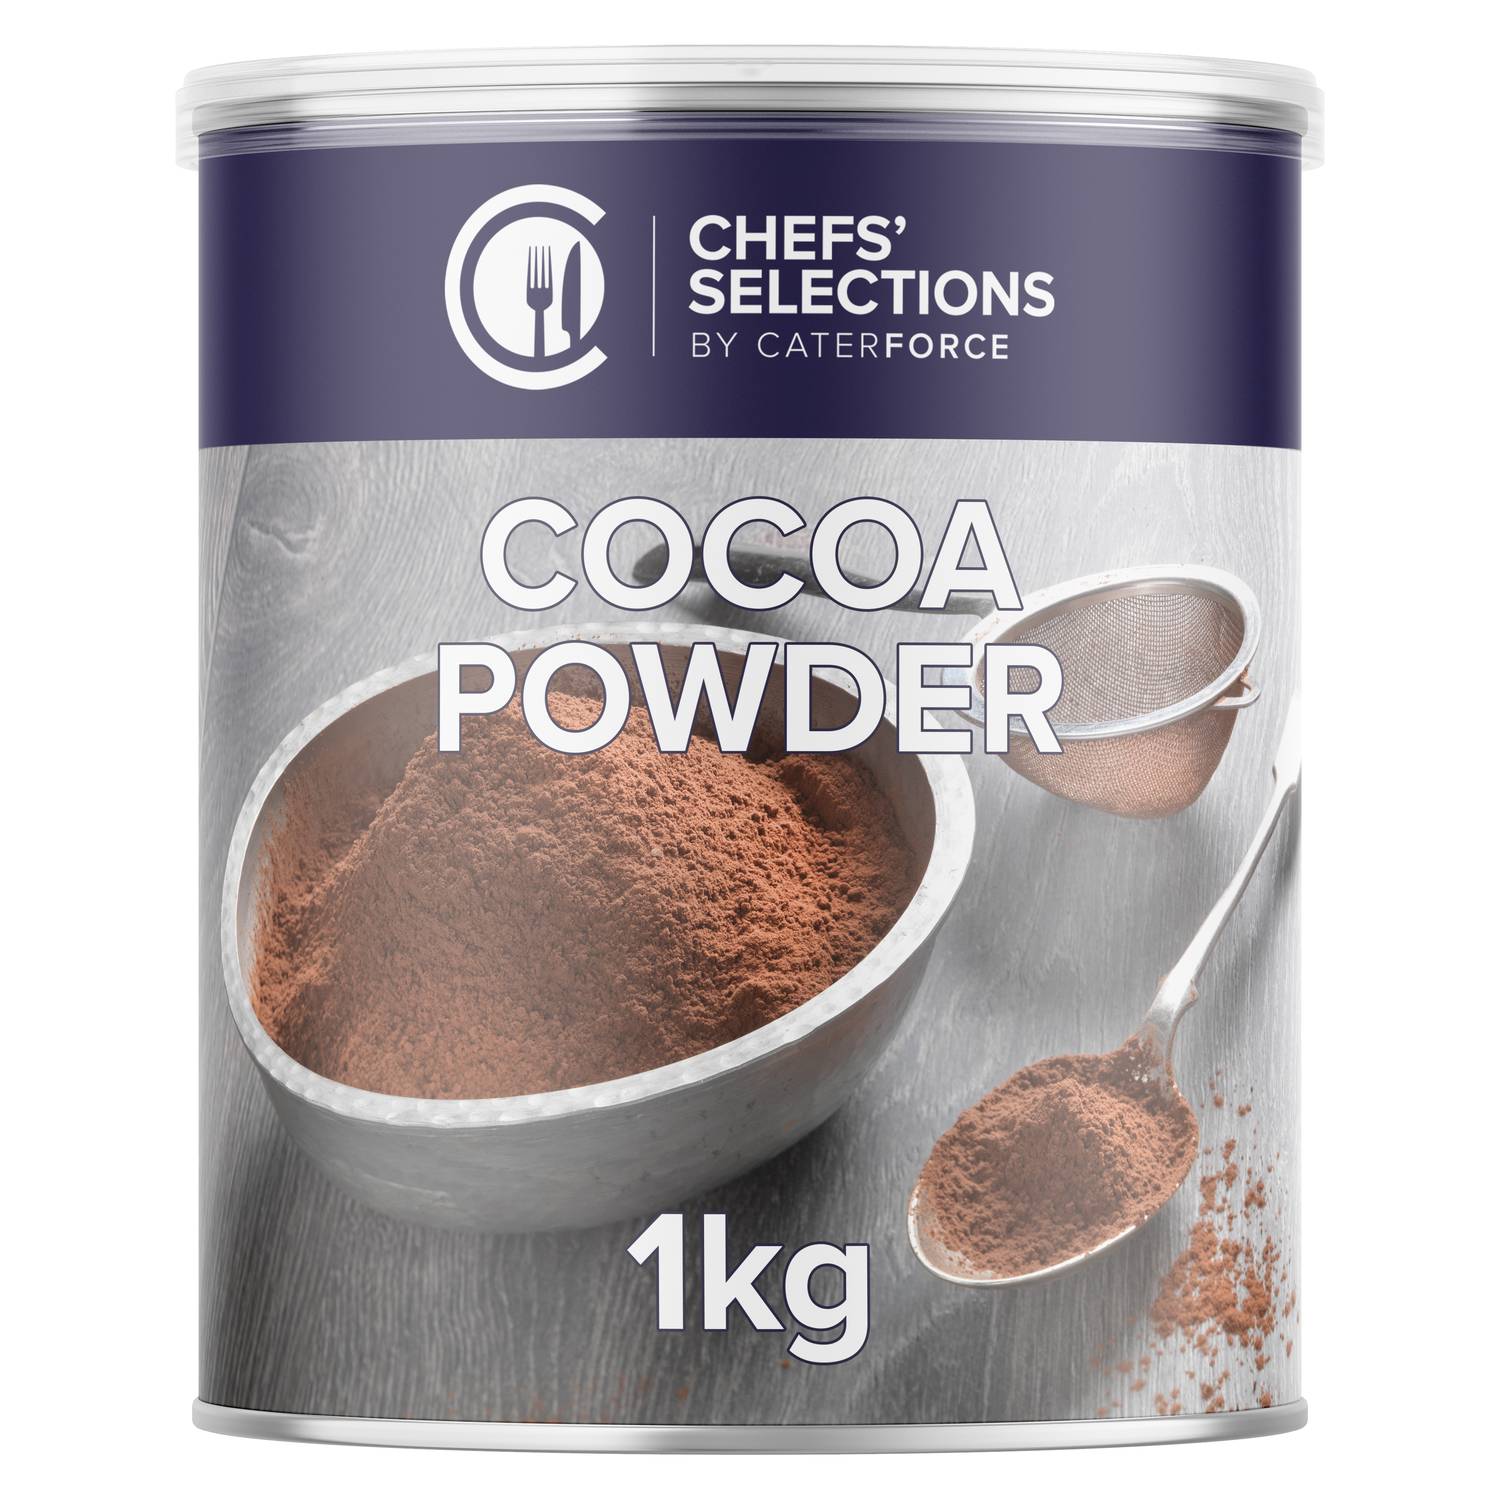 Chefs’ Selections Cocoa Powder (6 x 1kg)